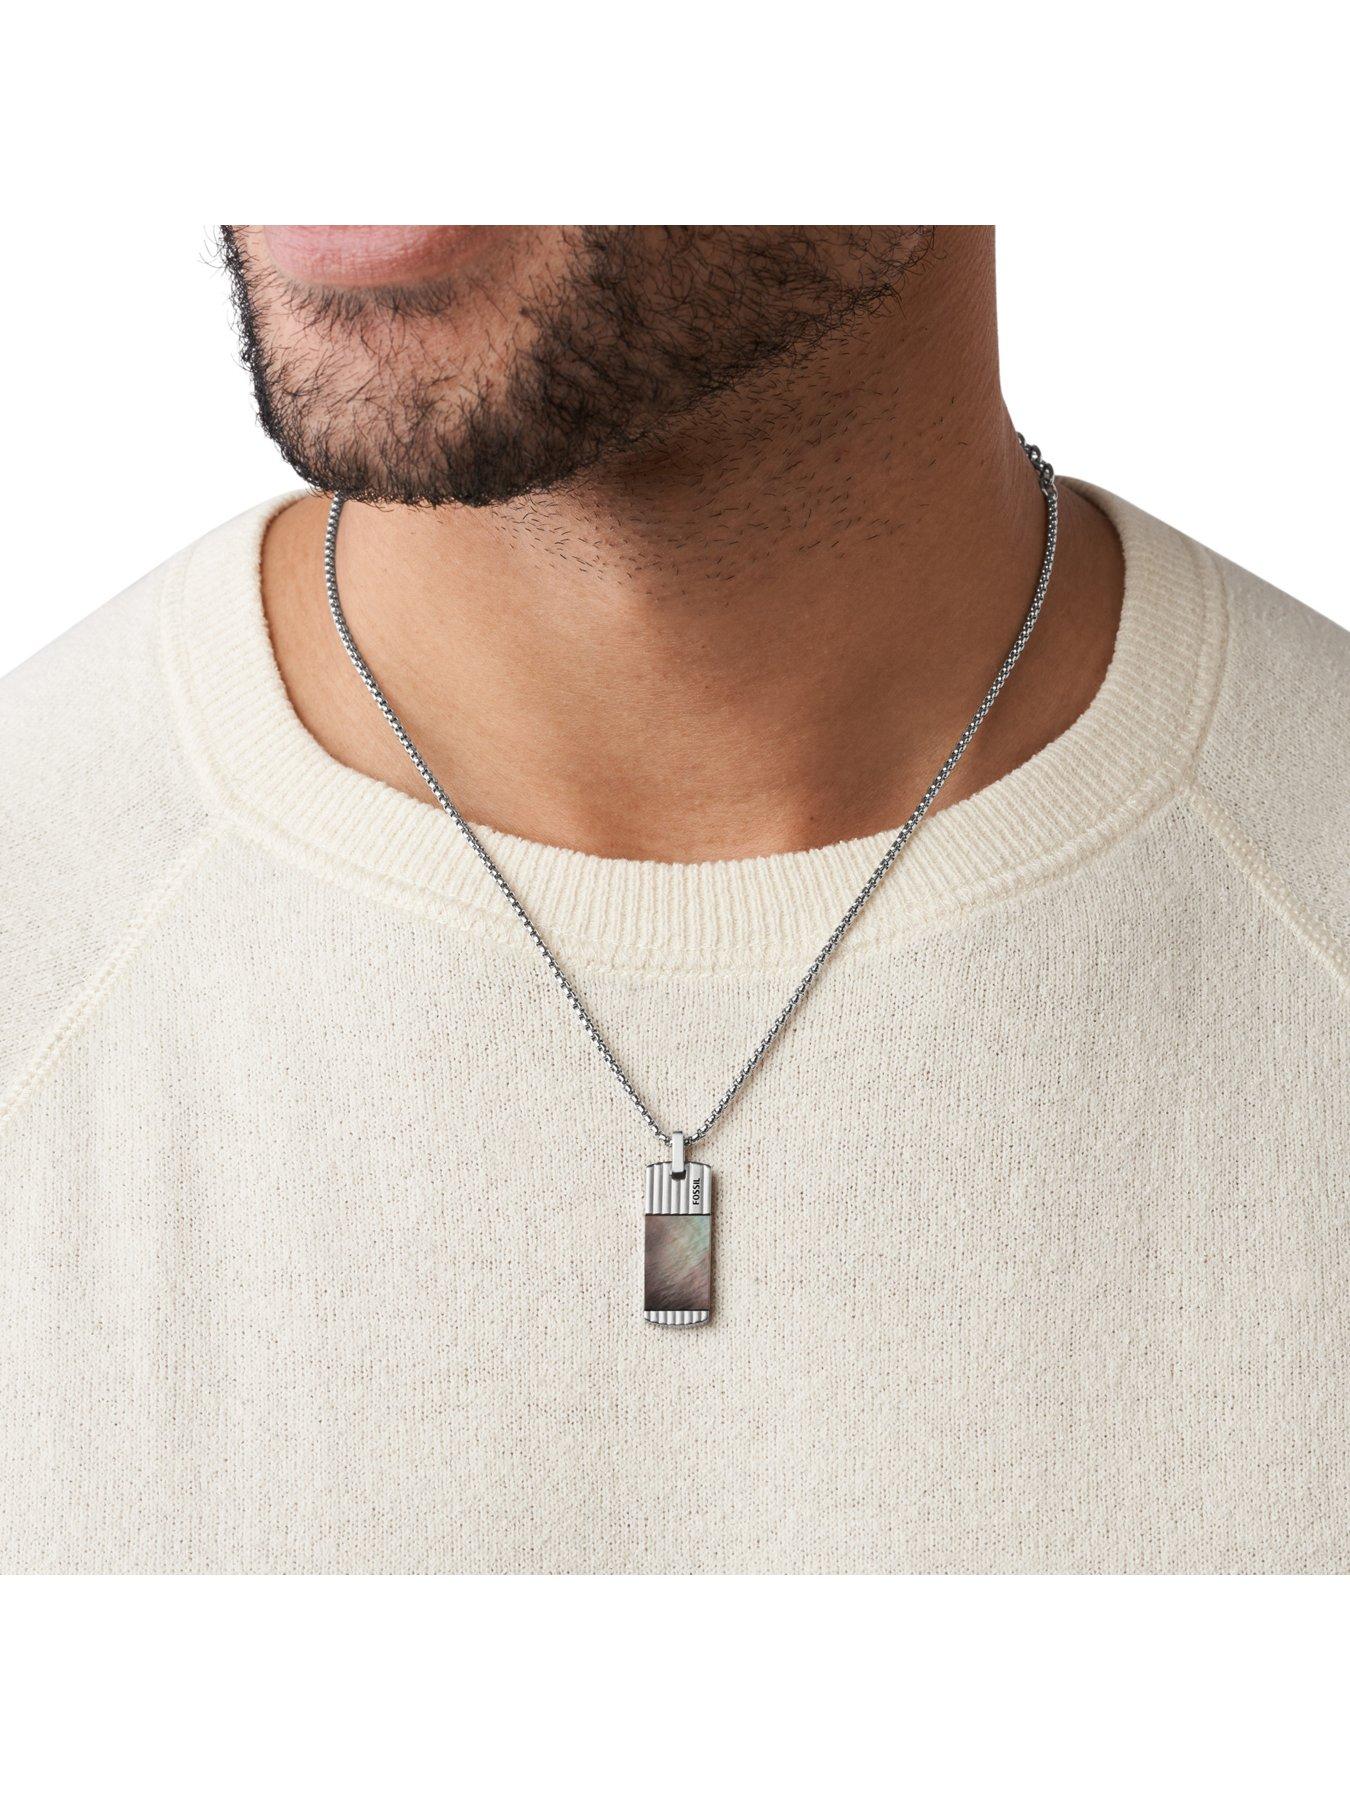  Vintage Casual Men's Necklace Stainless Steel